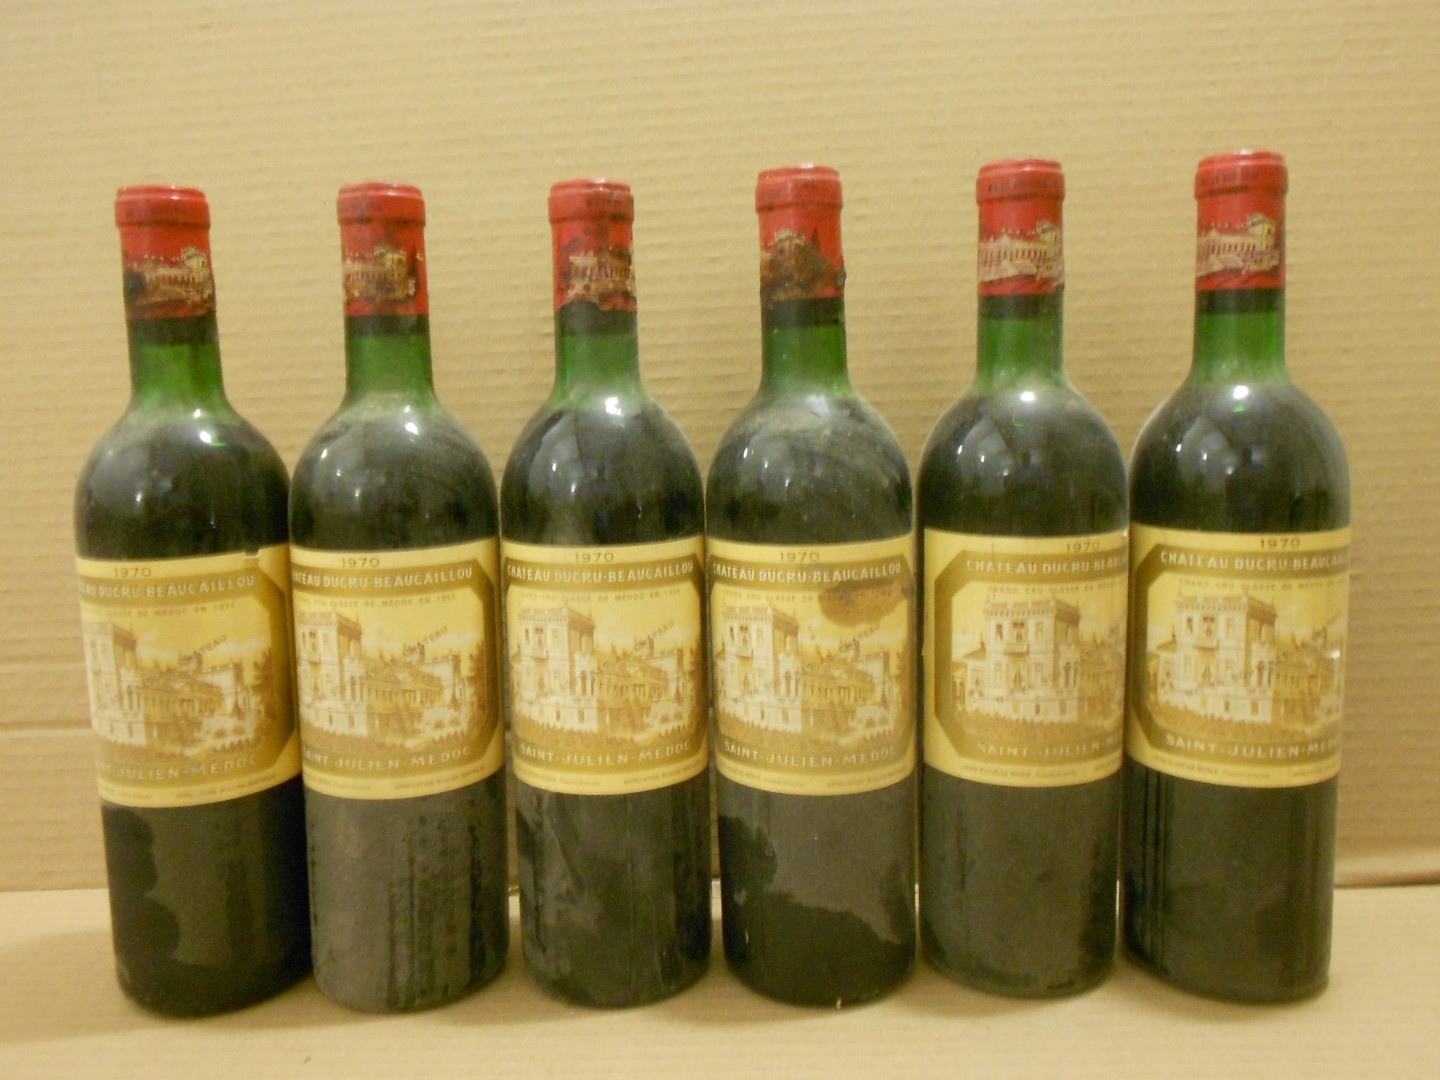 Chateau Ducru Beaucaillou, St Julien 2eme Cru 1970, twelve bottles. Removed from a college cellar. - Image 2 of 2